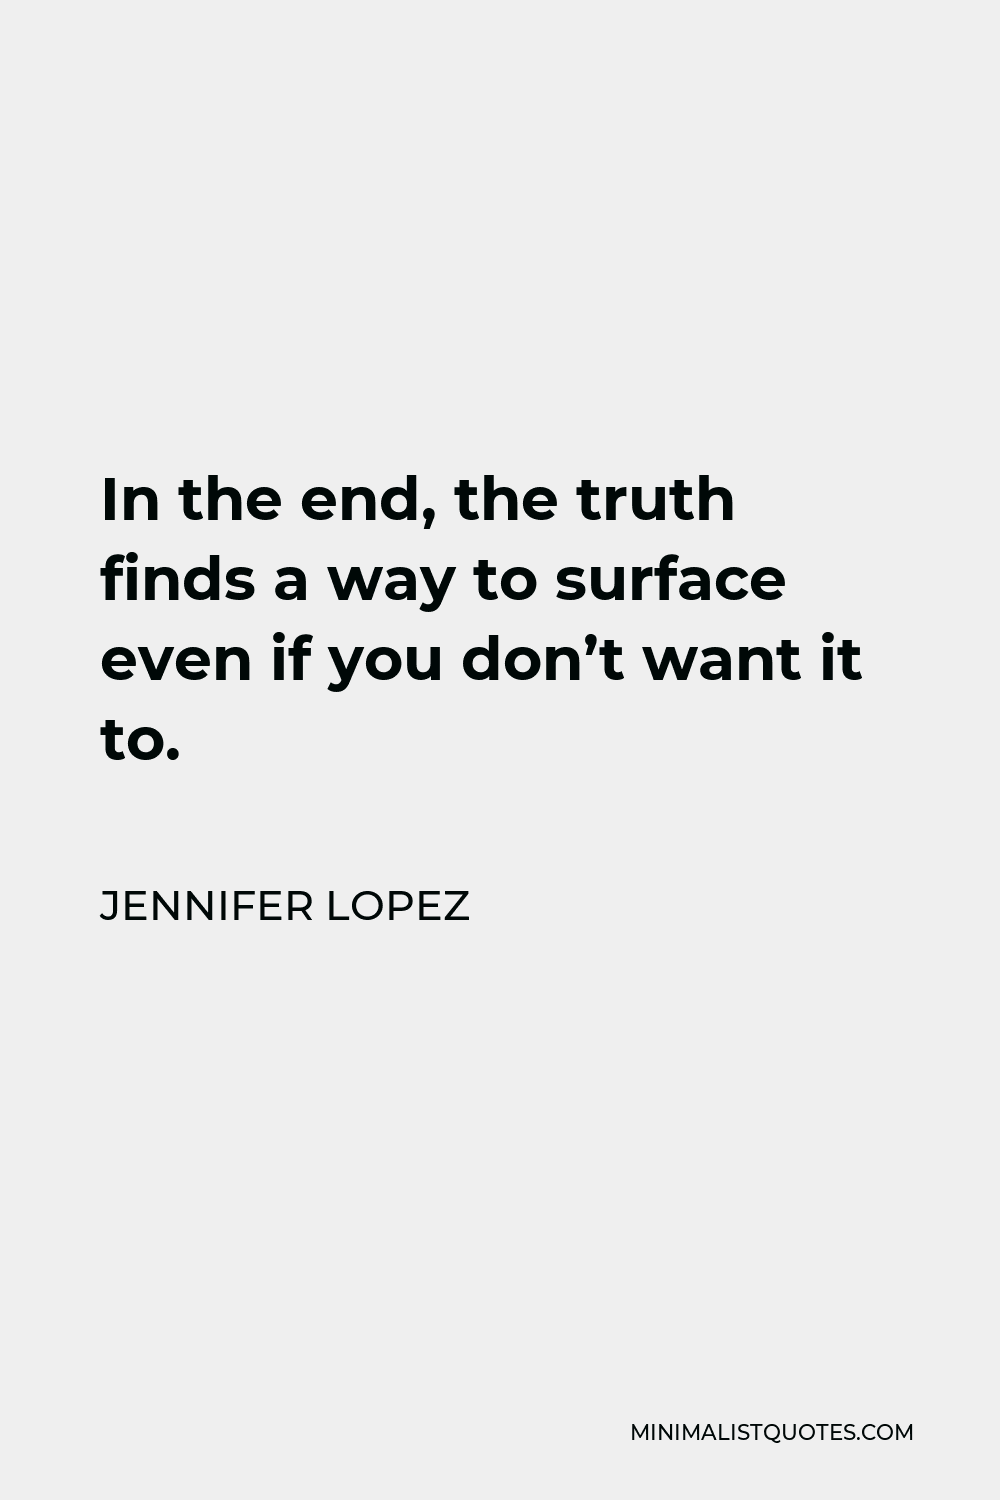 Jennifer Lopez Quote - In the end, the truth finds a way to surface even if you don’t want it to.